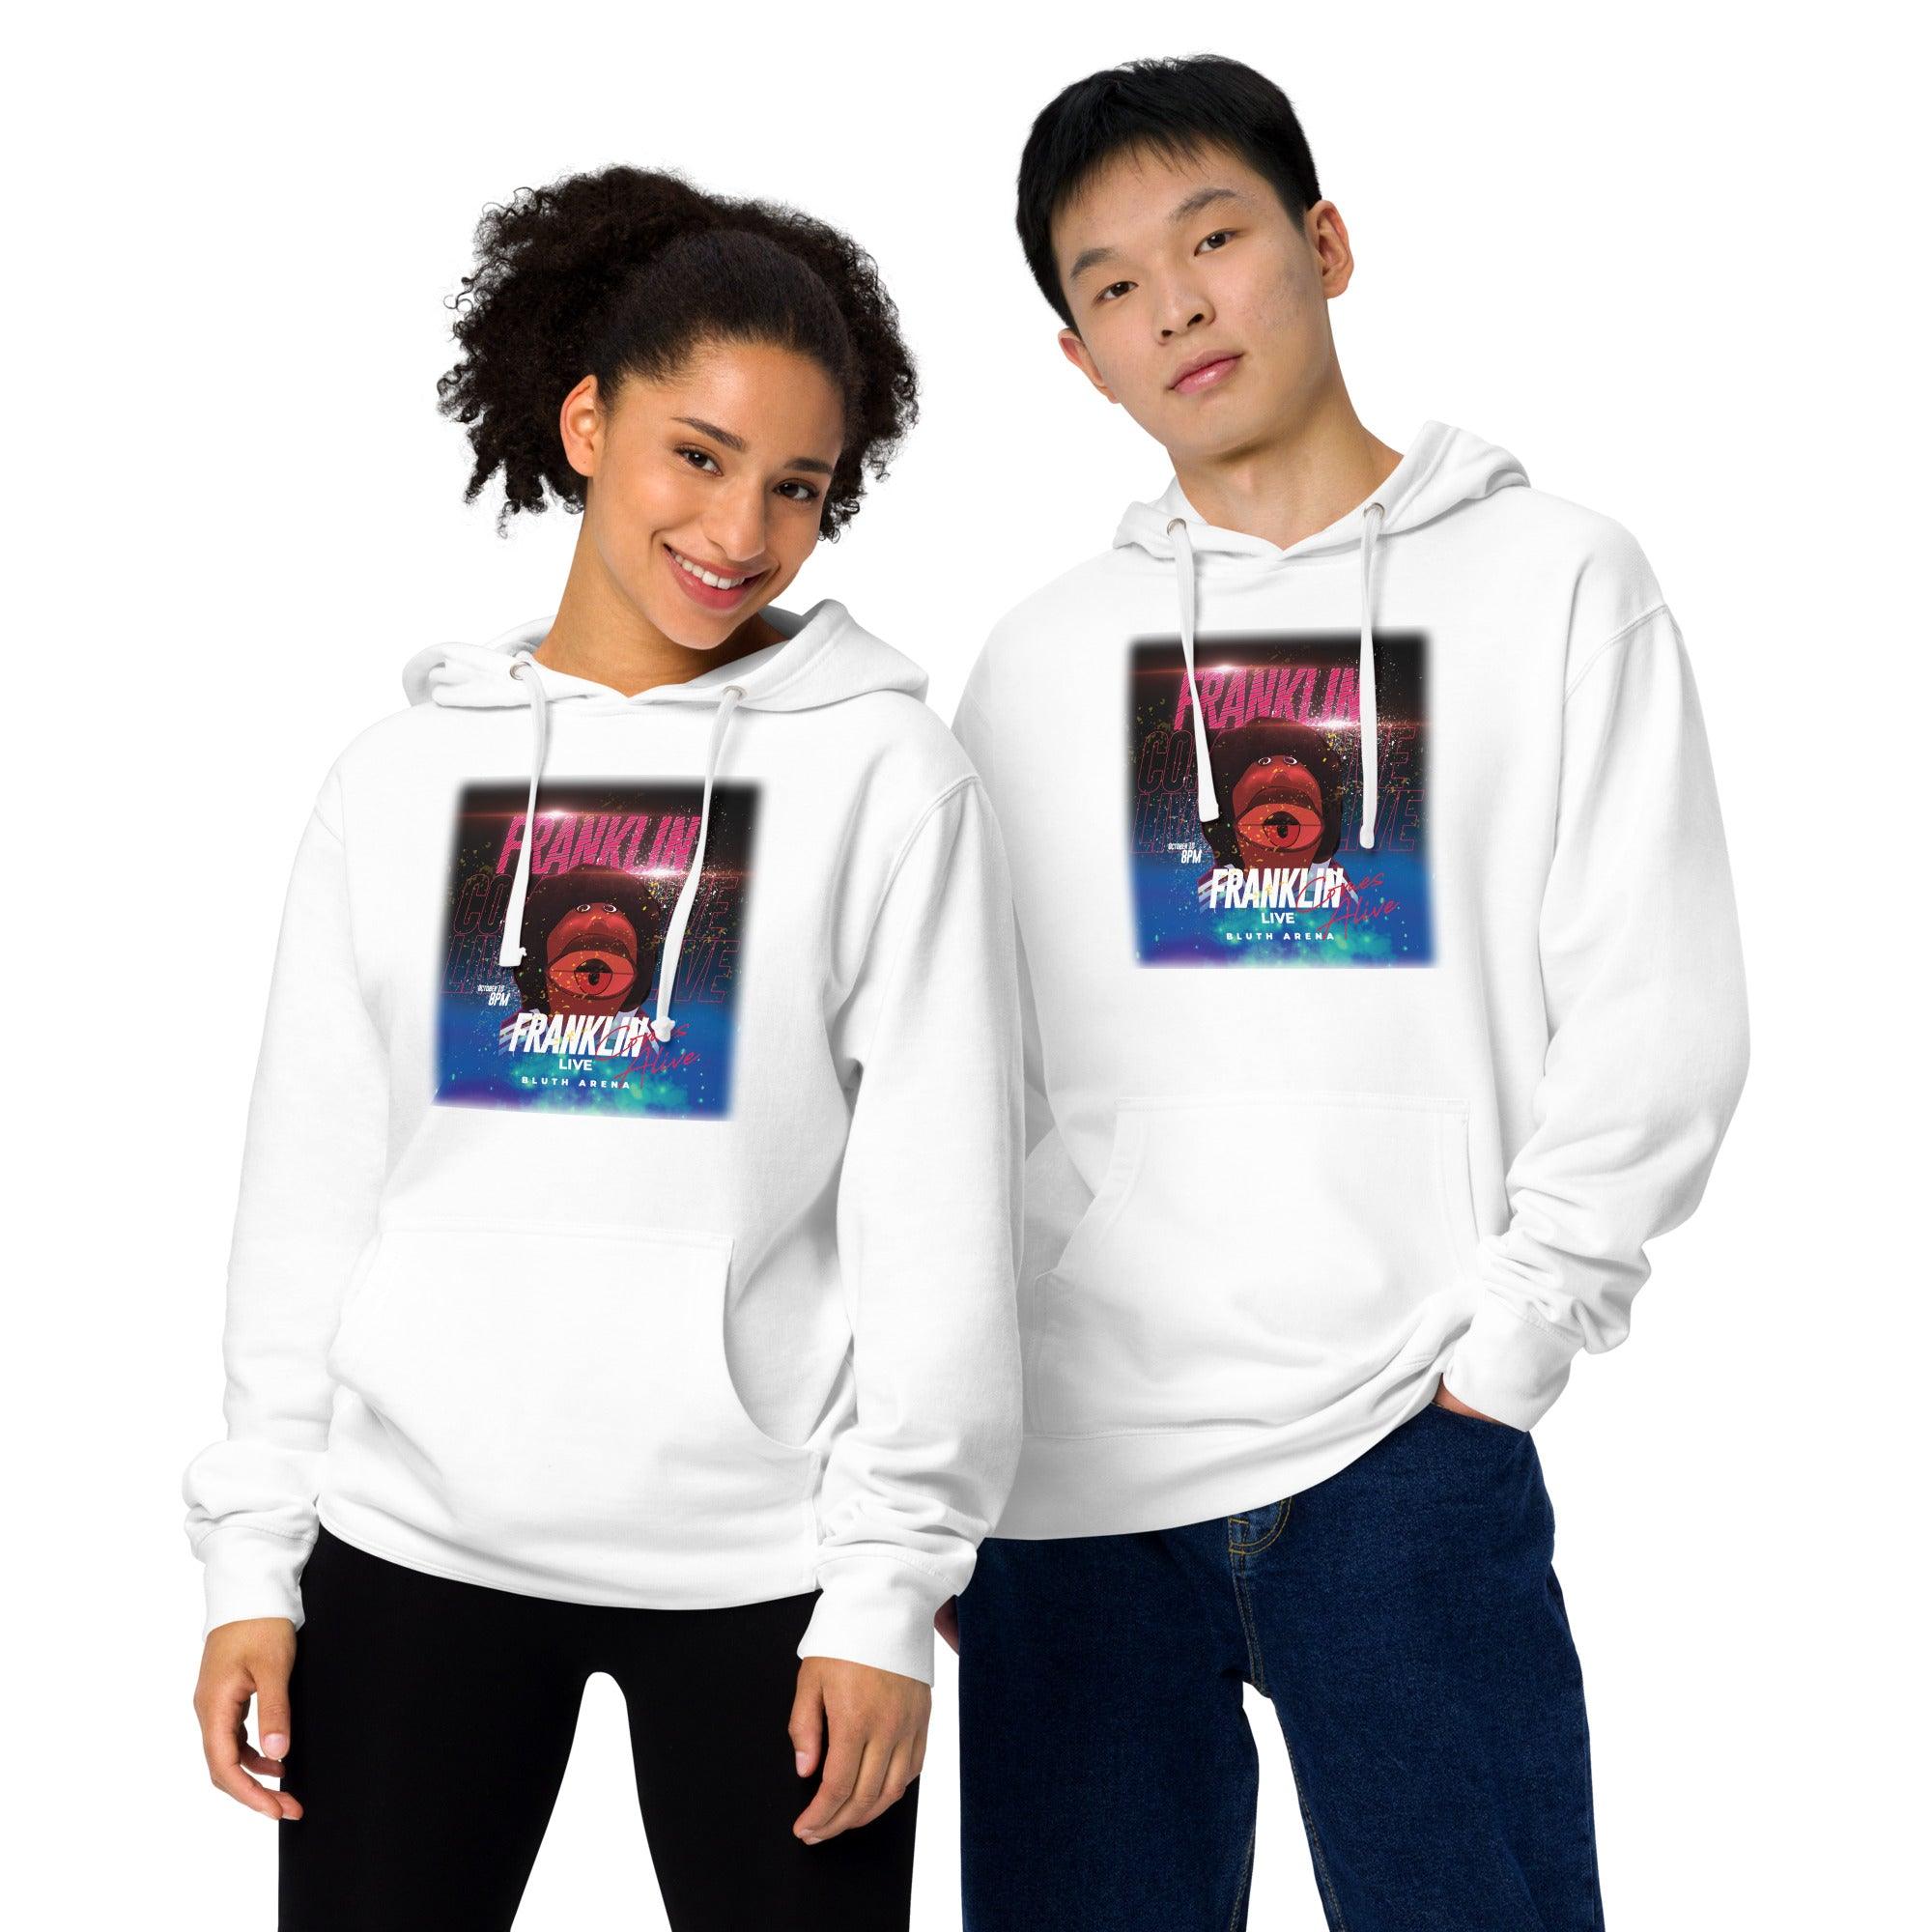 Franklin Comes Alive Live Unisex midweight hoodie VAWDesigns